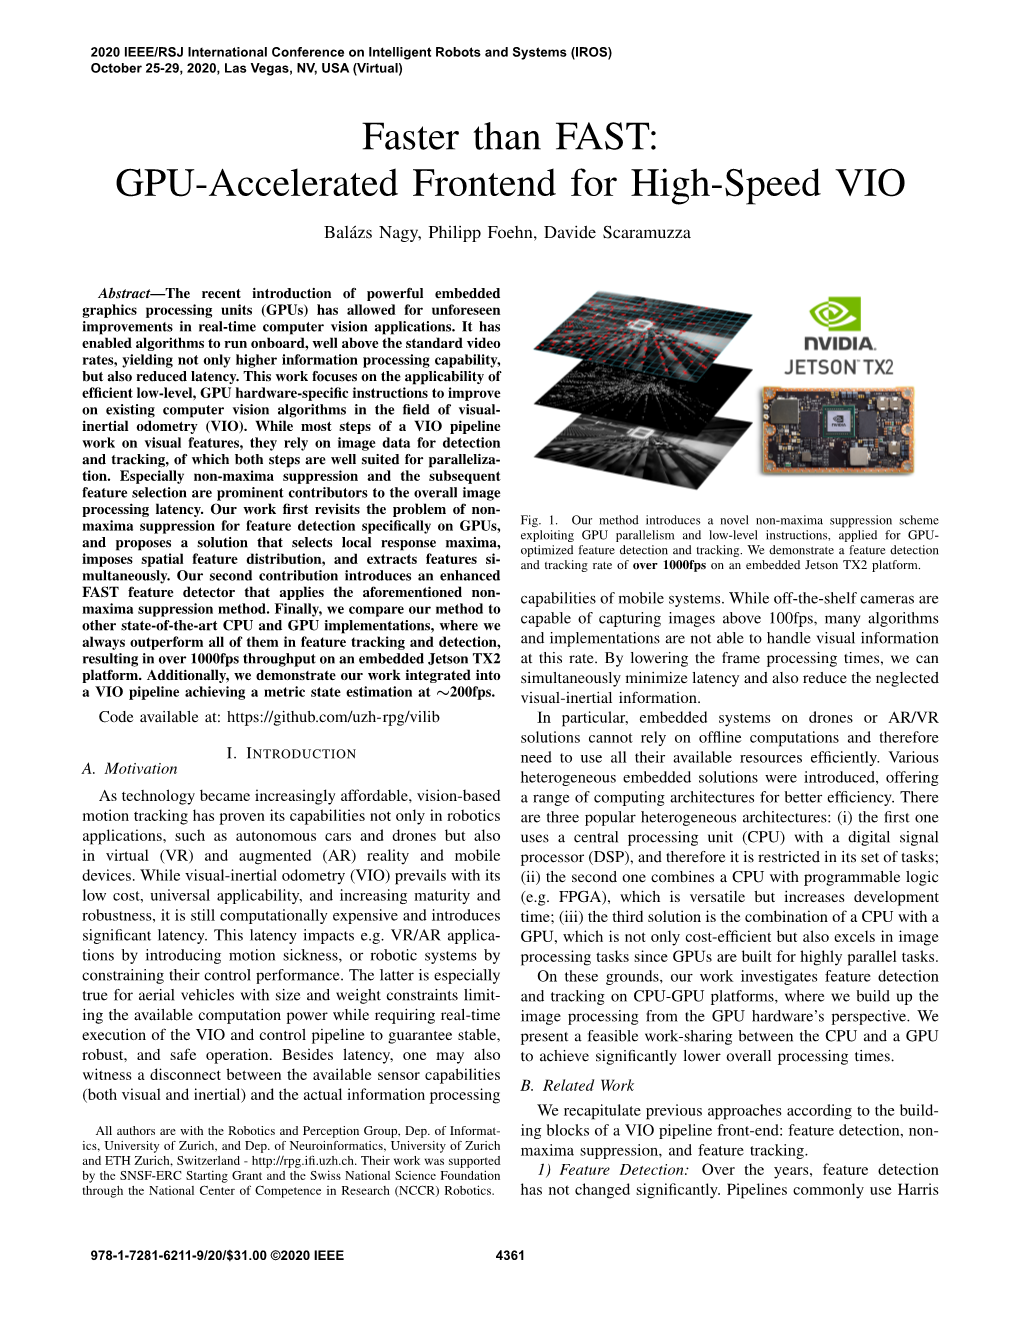 Faster Than FAST: GPU-Accelerated Frontend for High-Speed VIO